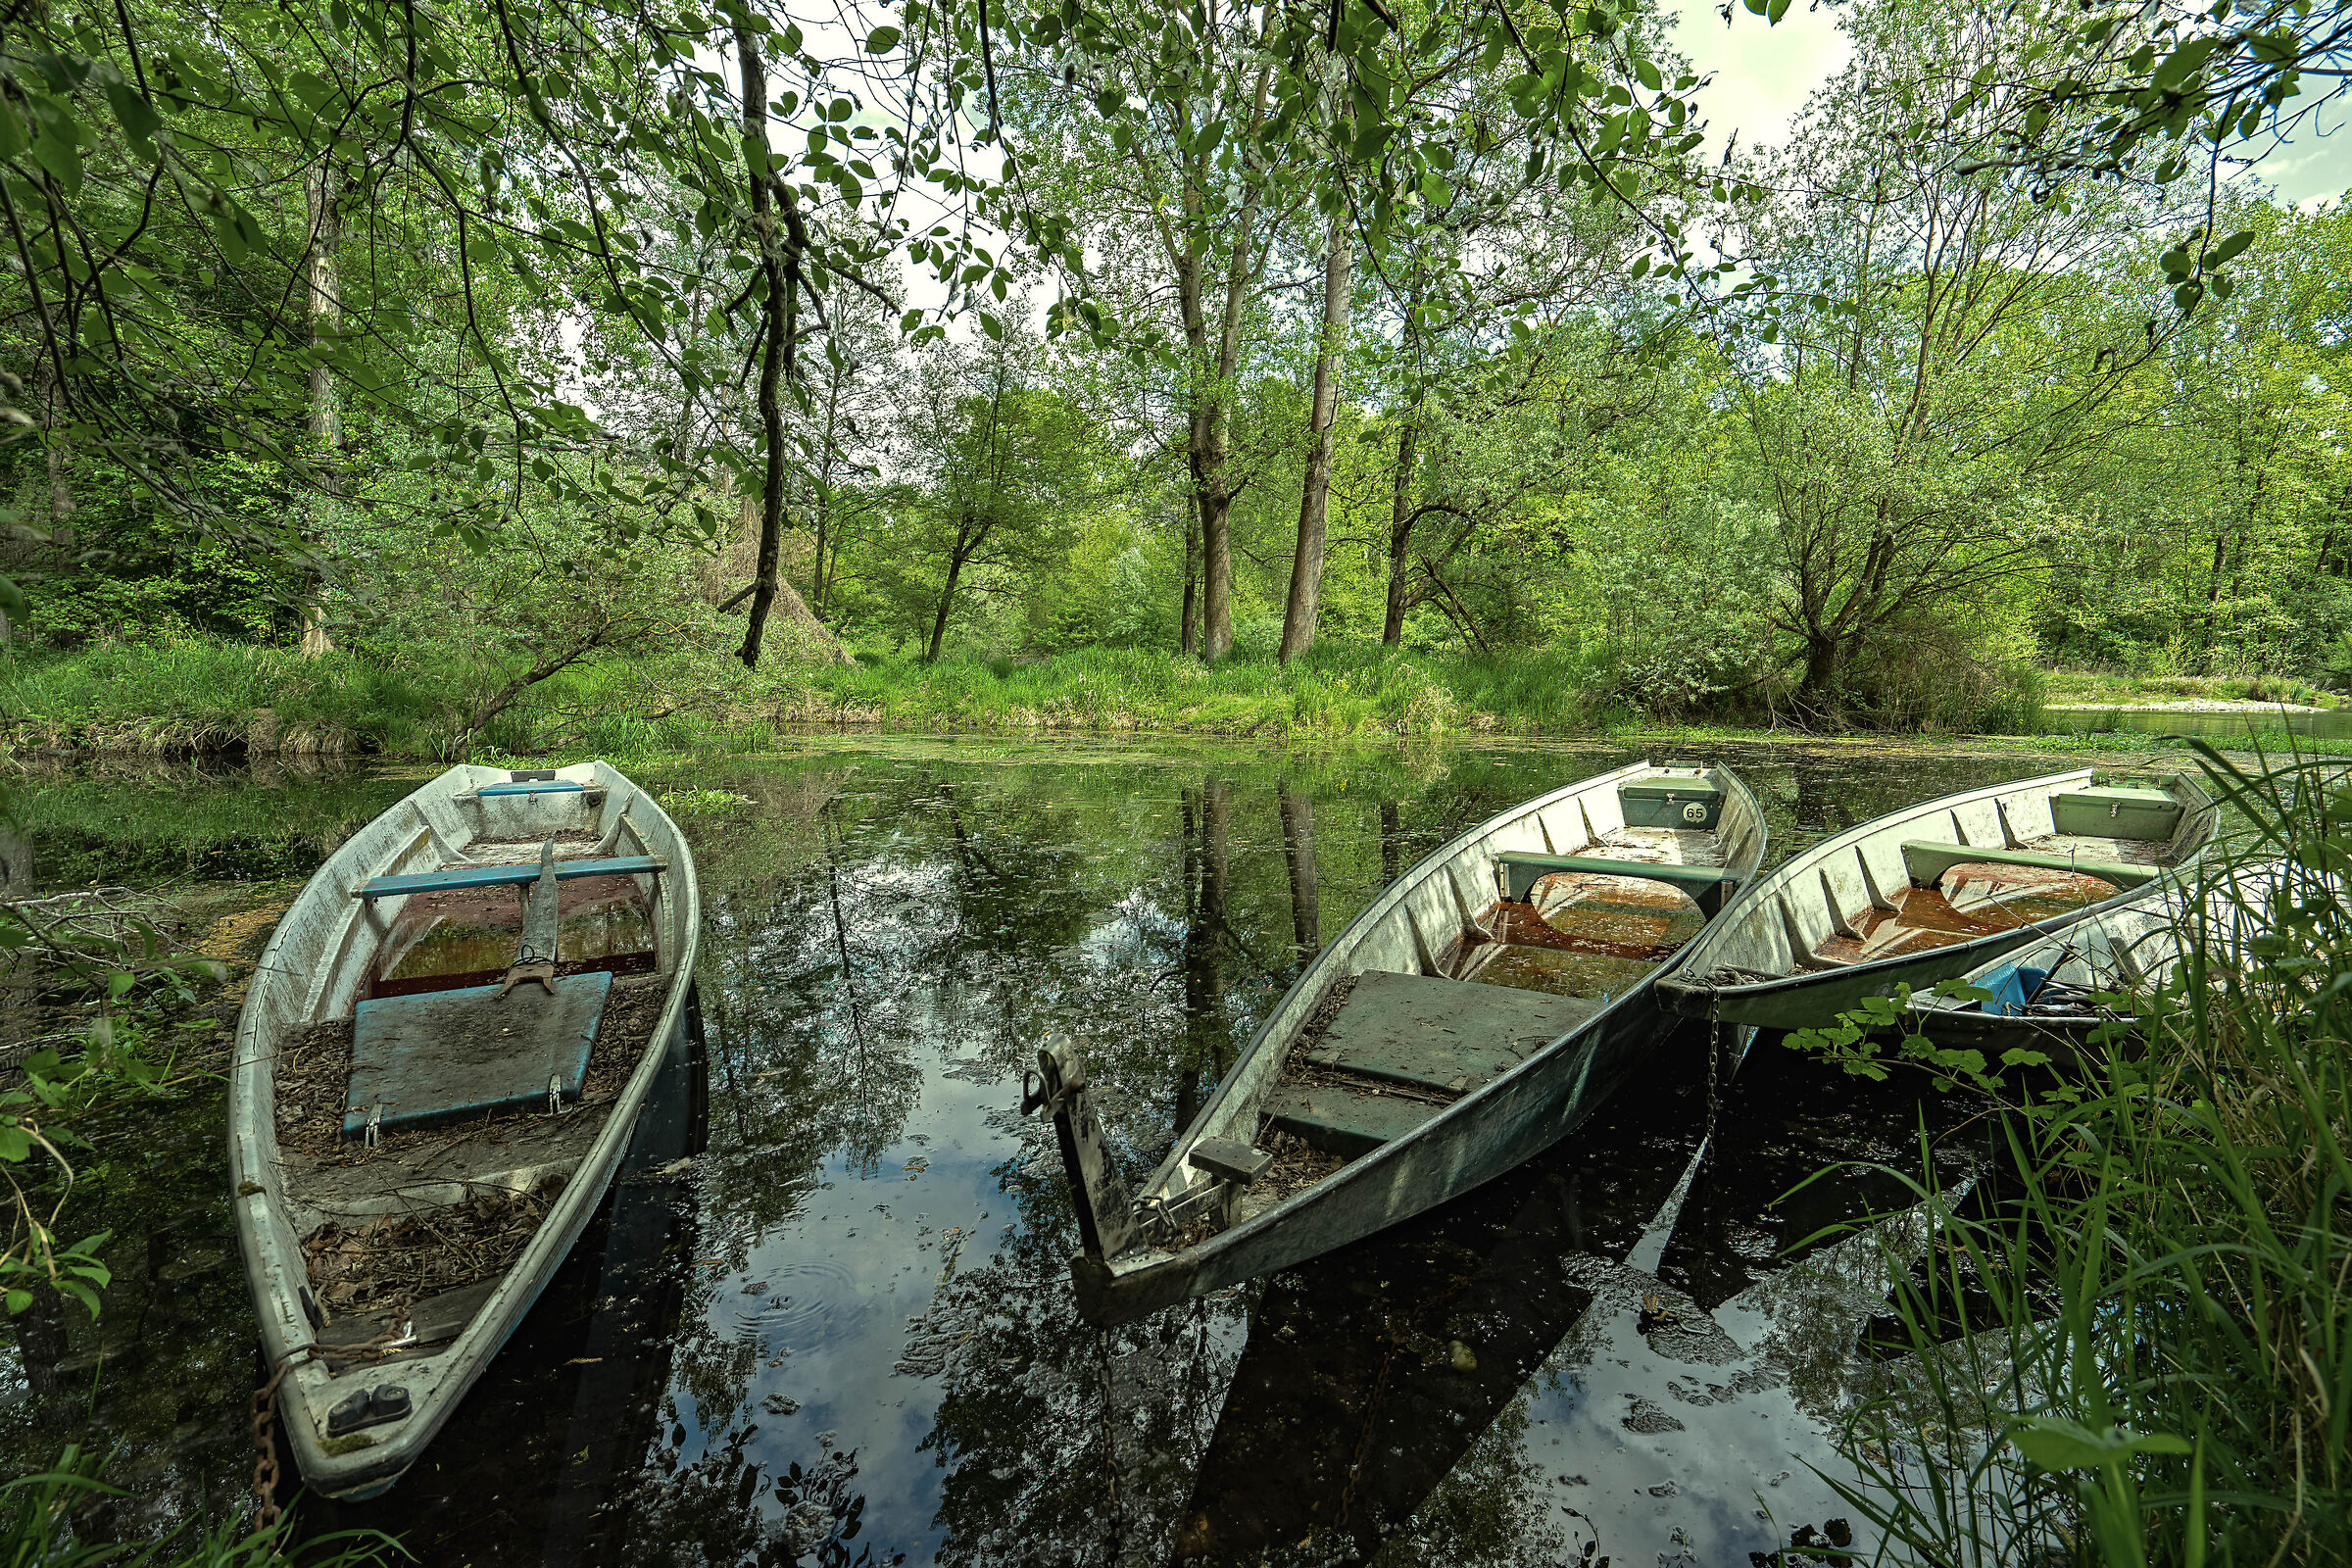 Boats at rest...